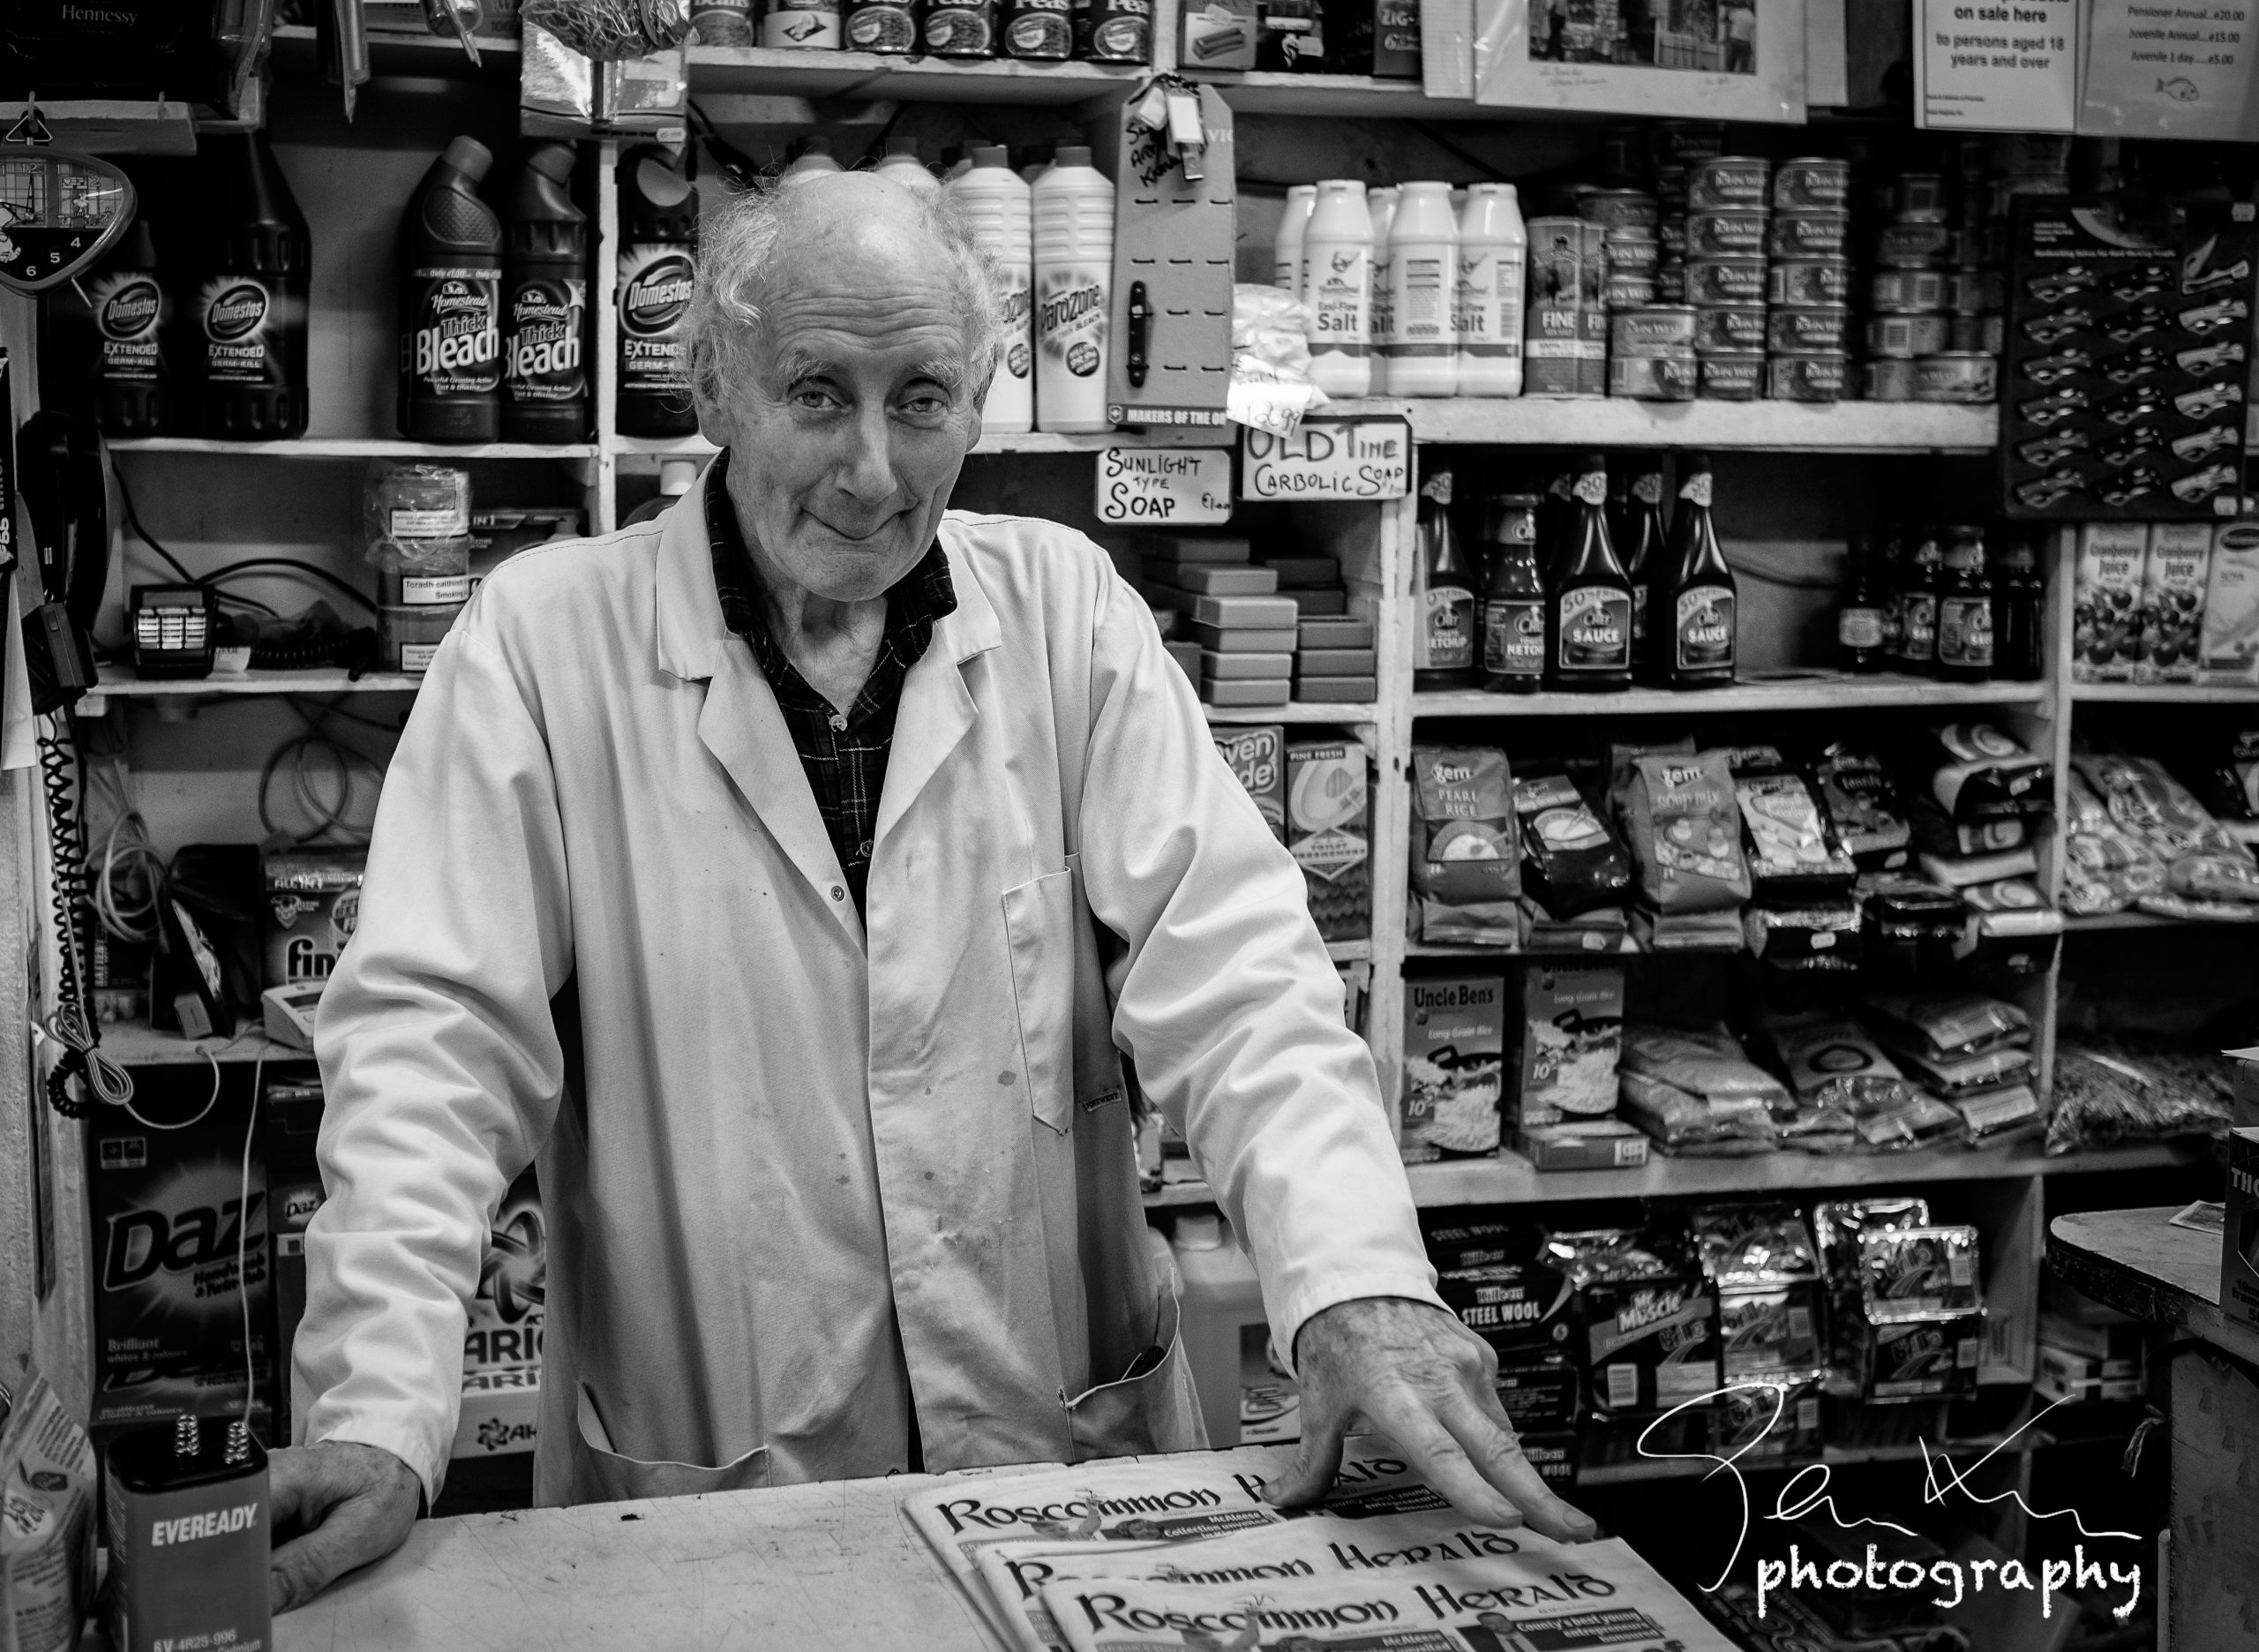 Roscommon shopkeeper with traditional overcoat